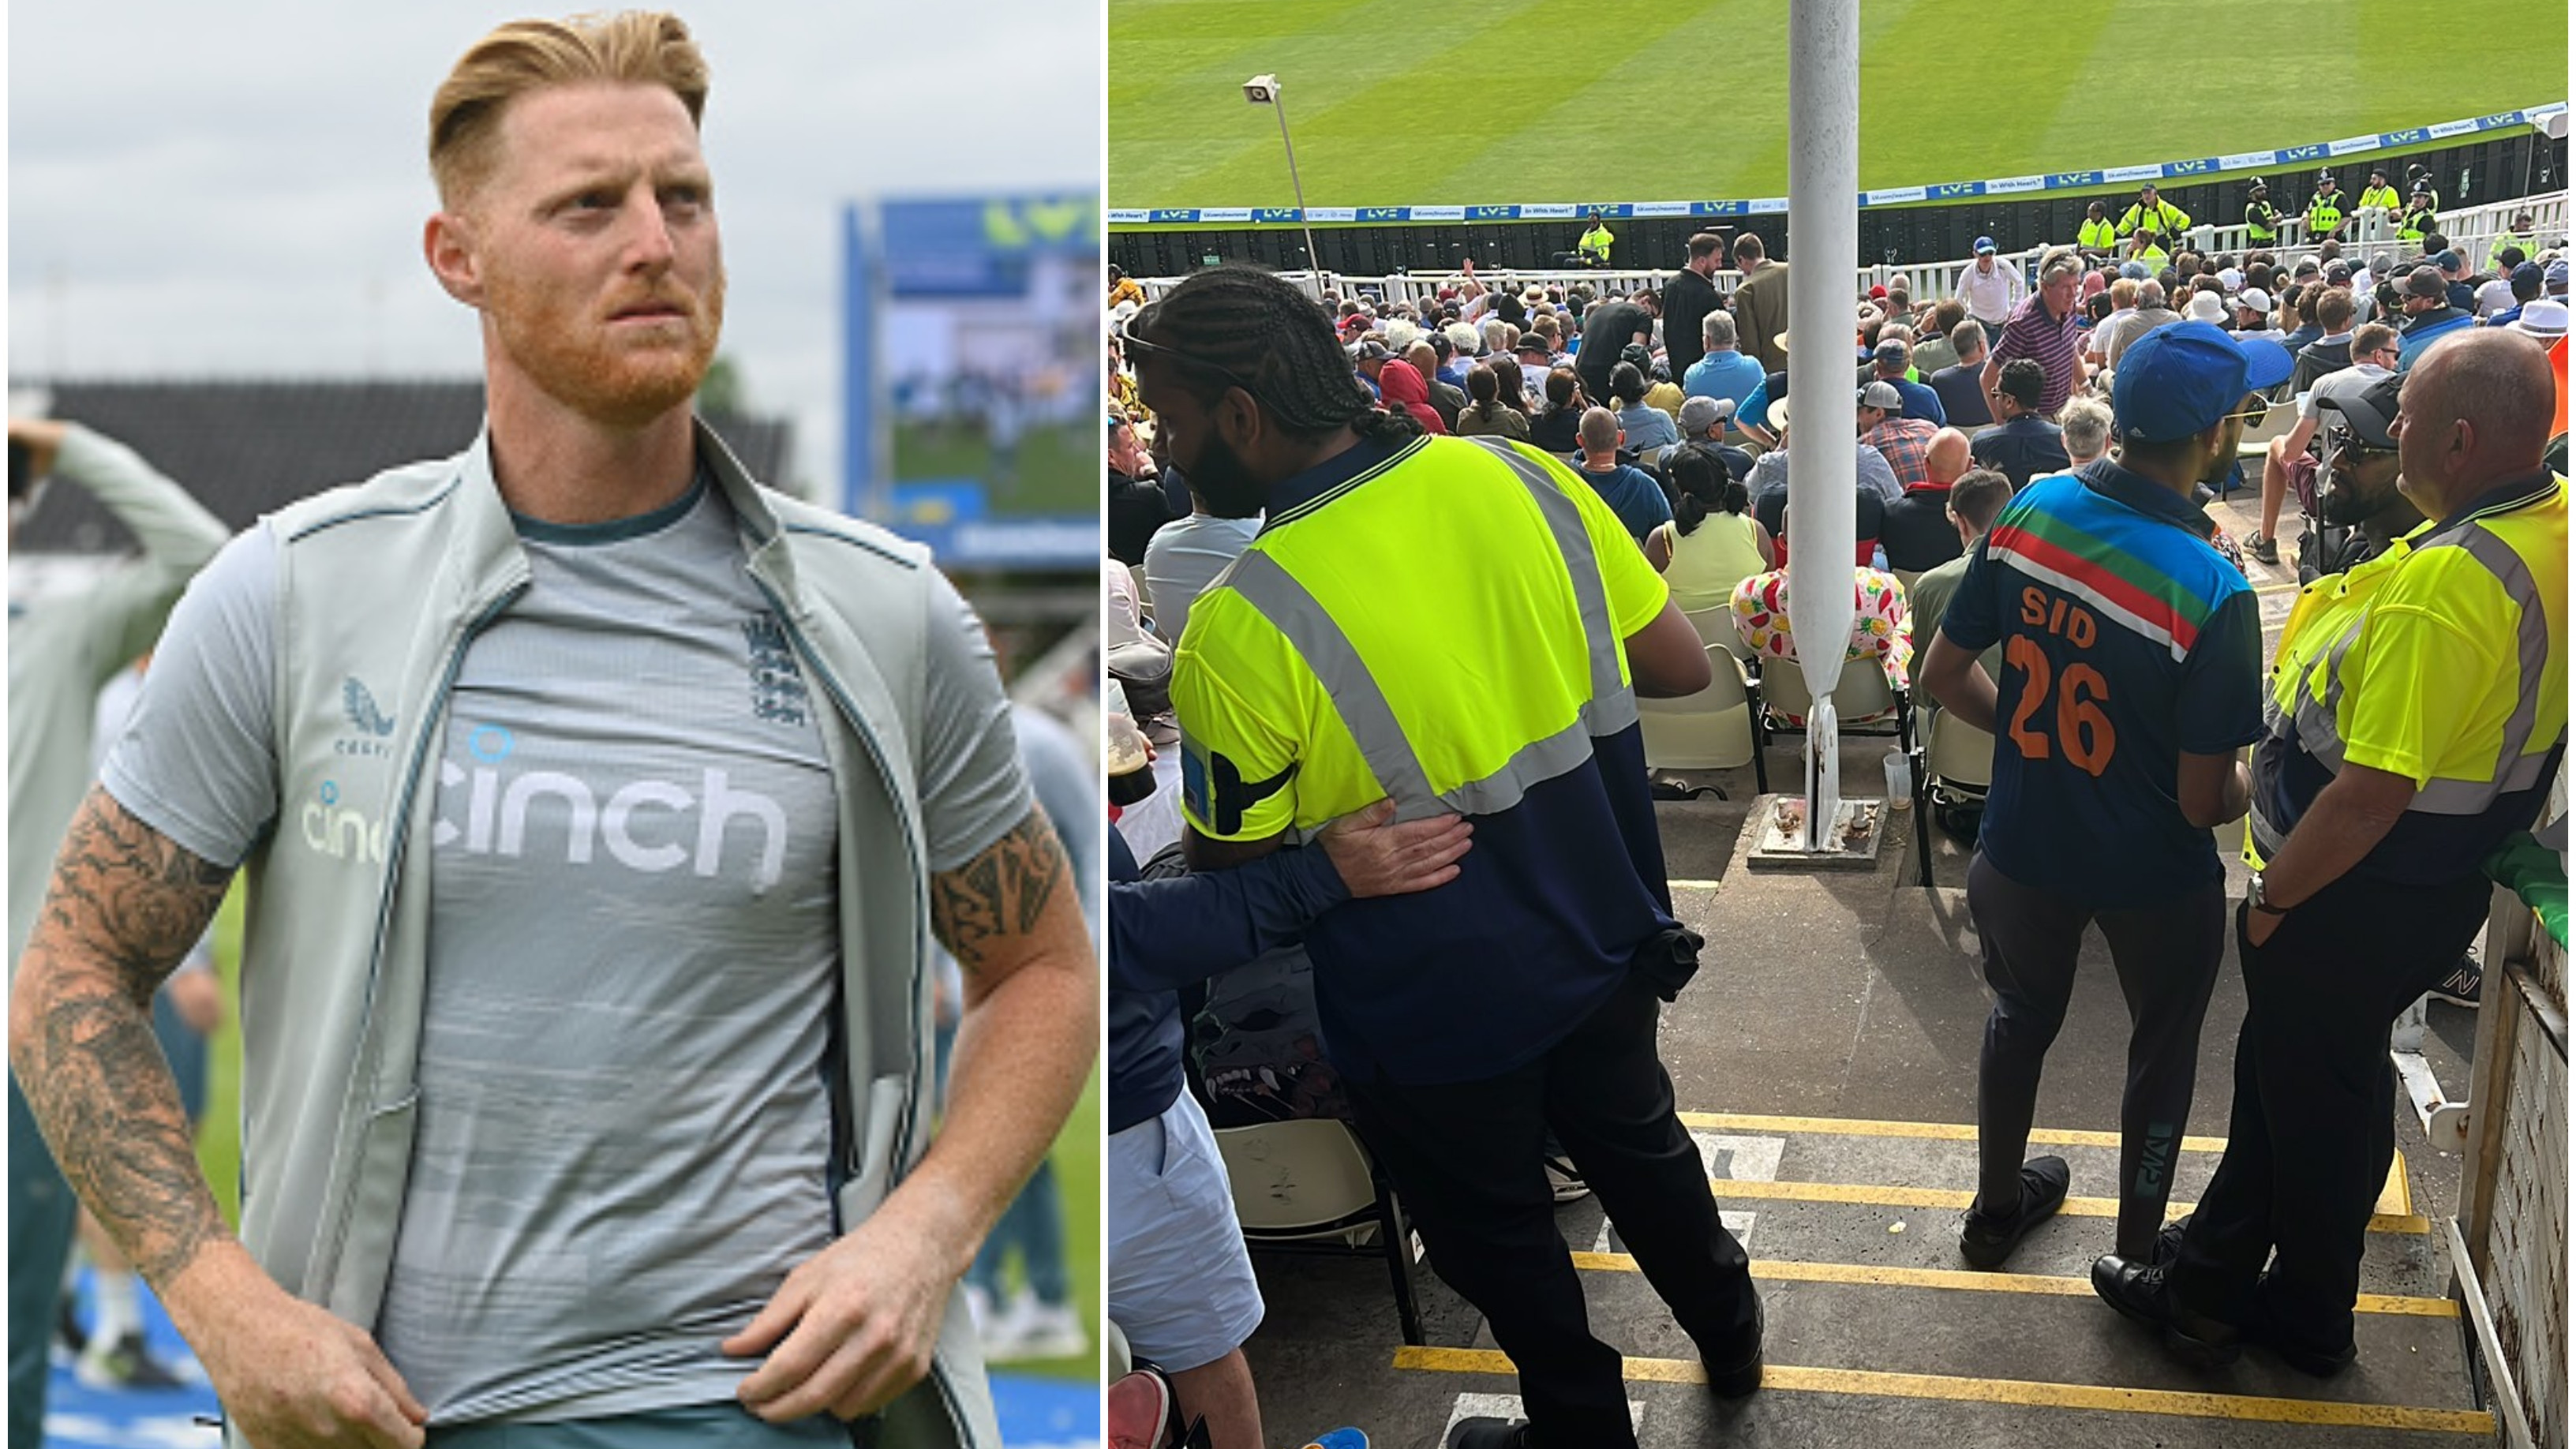 ENG v IND 2022: Ben Stokes expresses his disappointment over racial abuse incident at Edgbaston